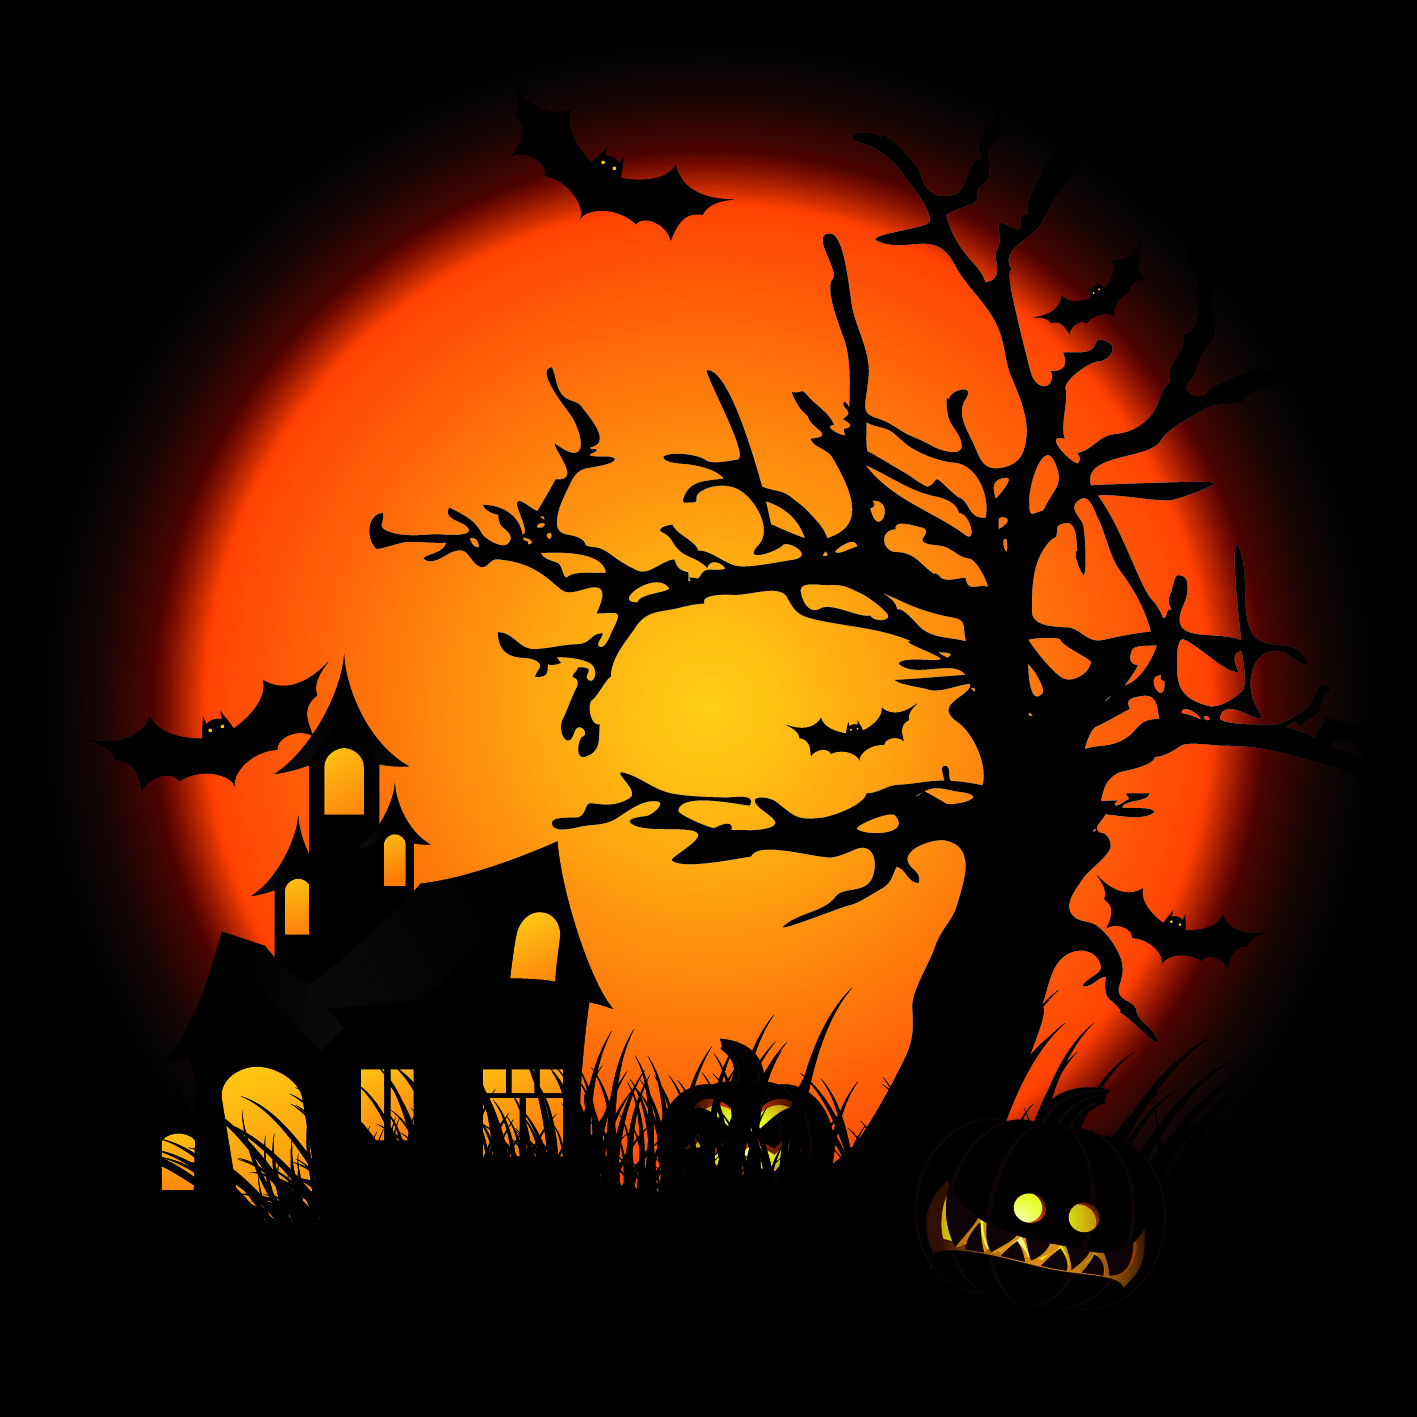 Free Halloween Clip Art For .